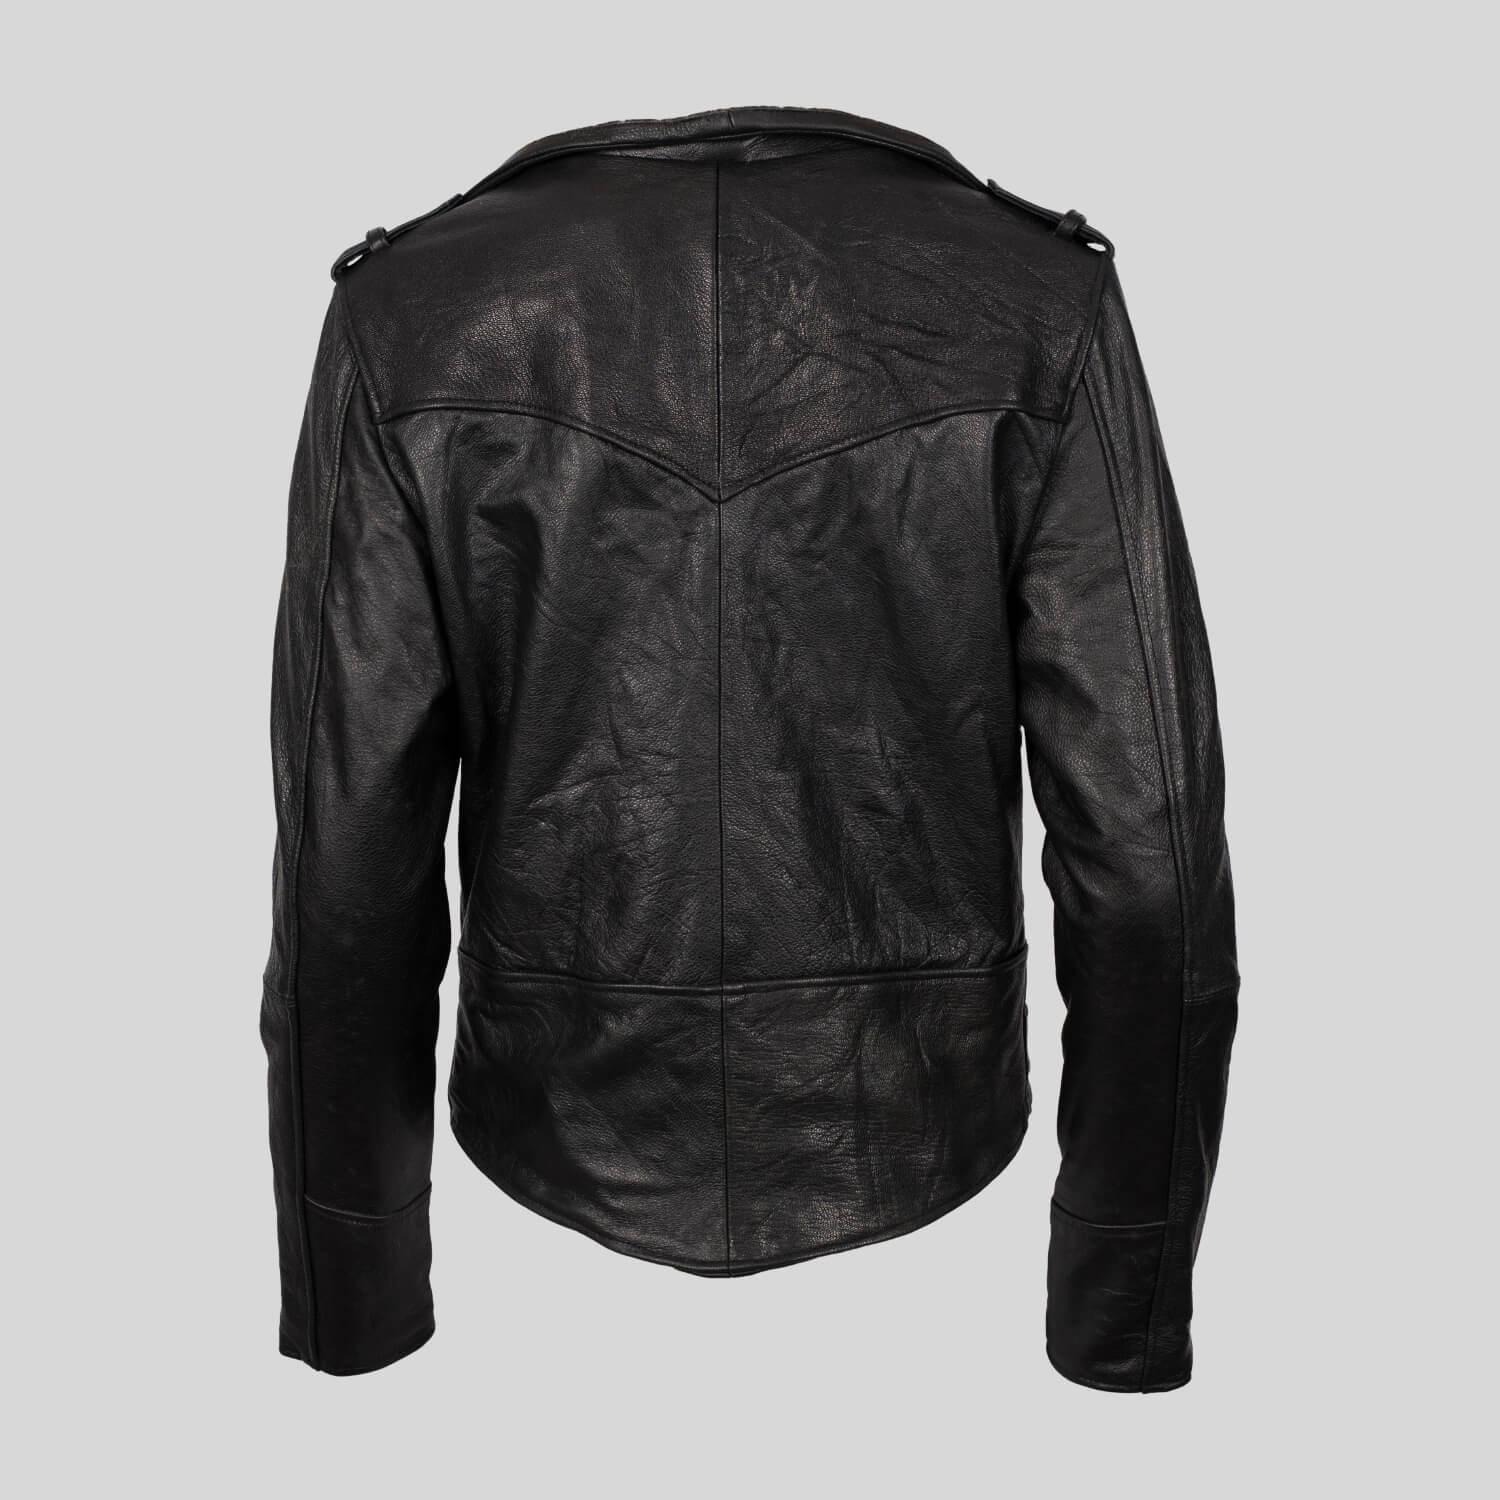 Buy Pelechecoco Pamela Jacket made from sustainable leather